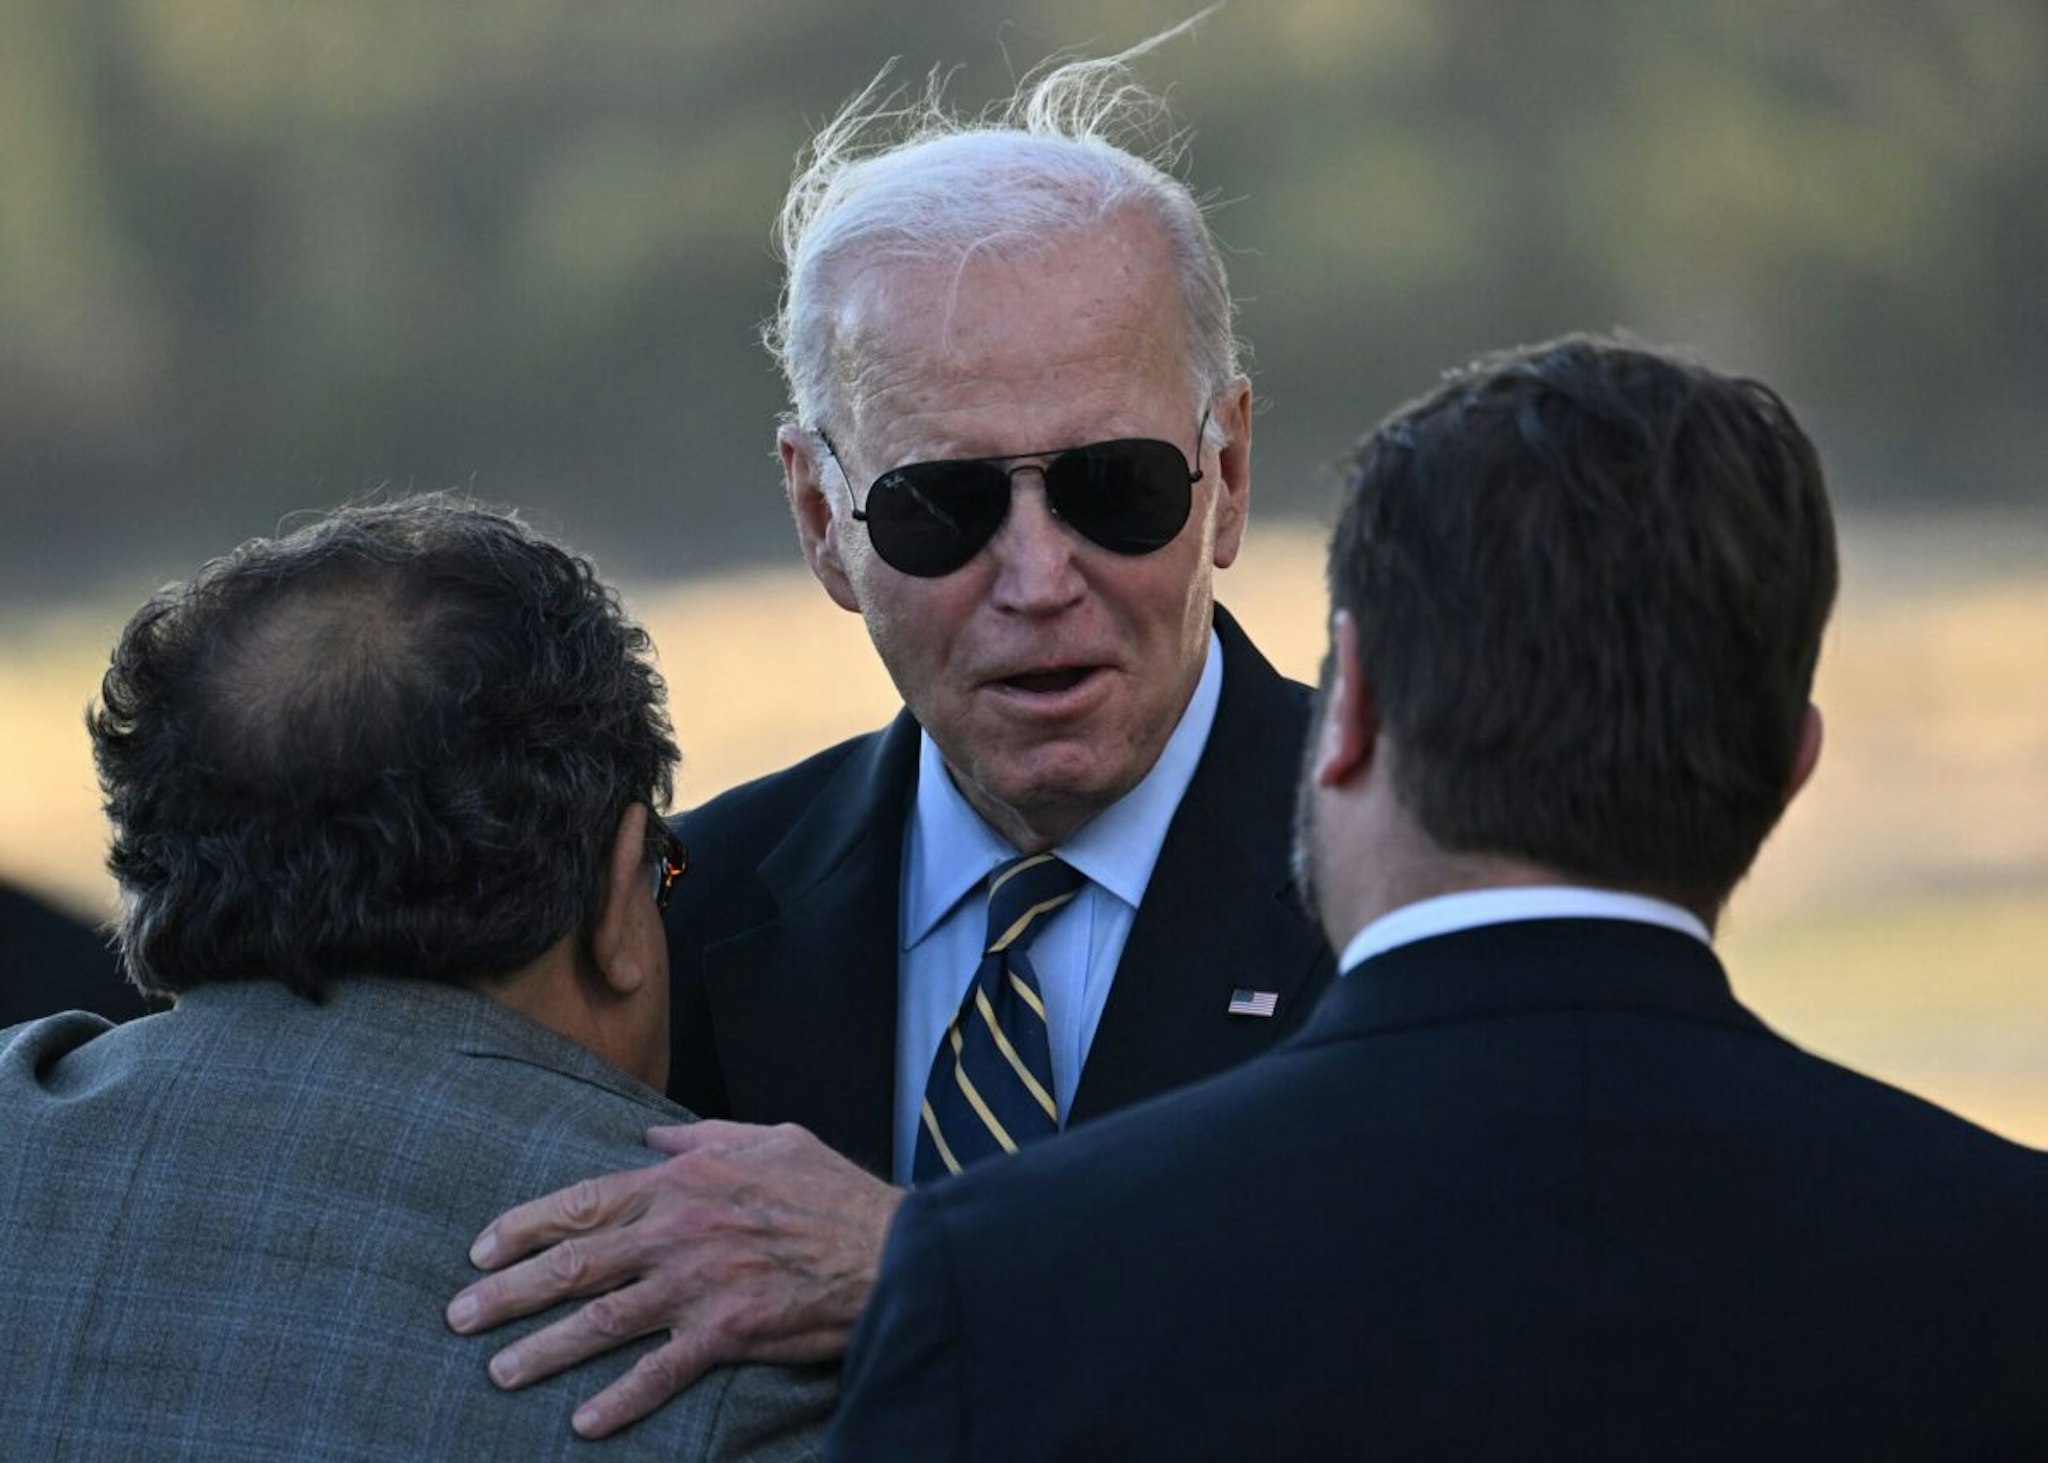 US President Joe Biden is greeted as he arrives at Grand Canyon National Park Airport in Grand Canyon Village, Arizona, on August 7, 2023.